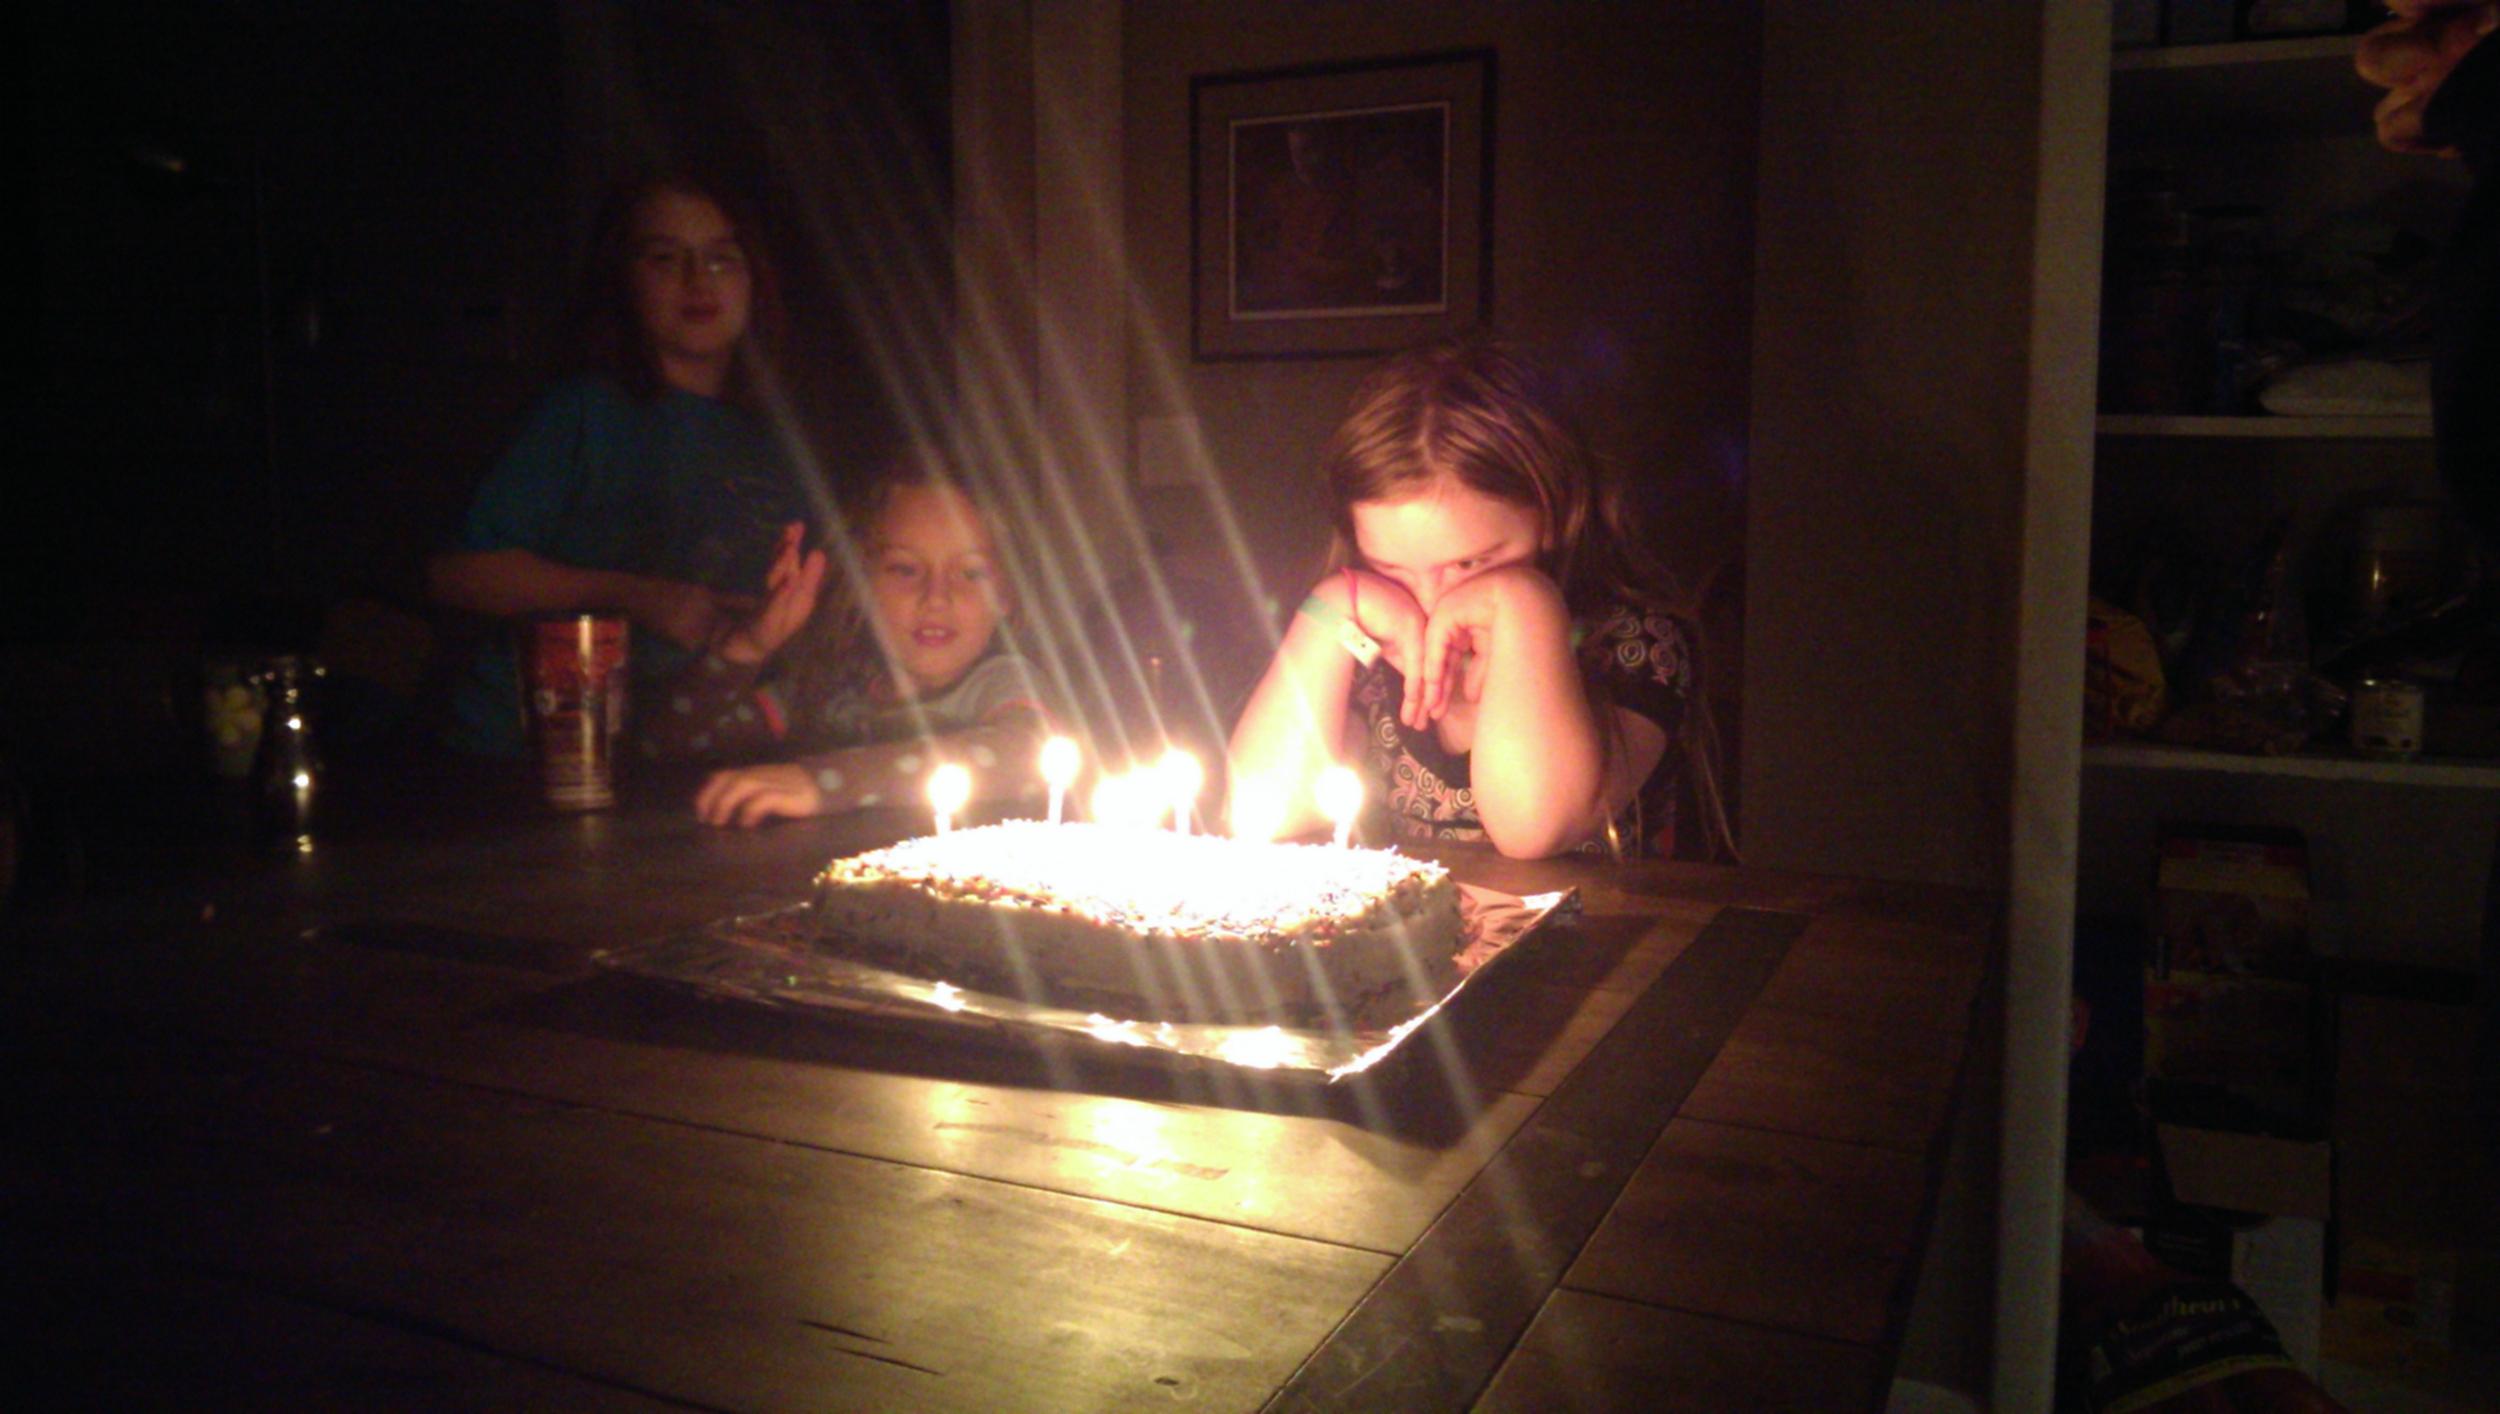 She gets embarrassed when we sing "Happy Birthday."